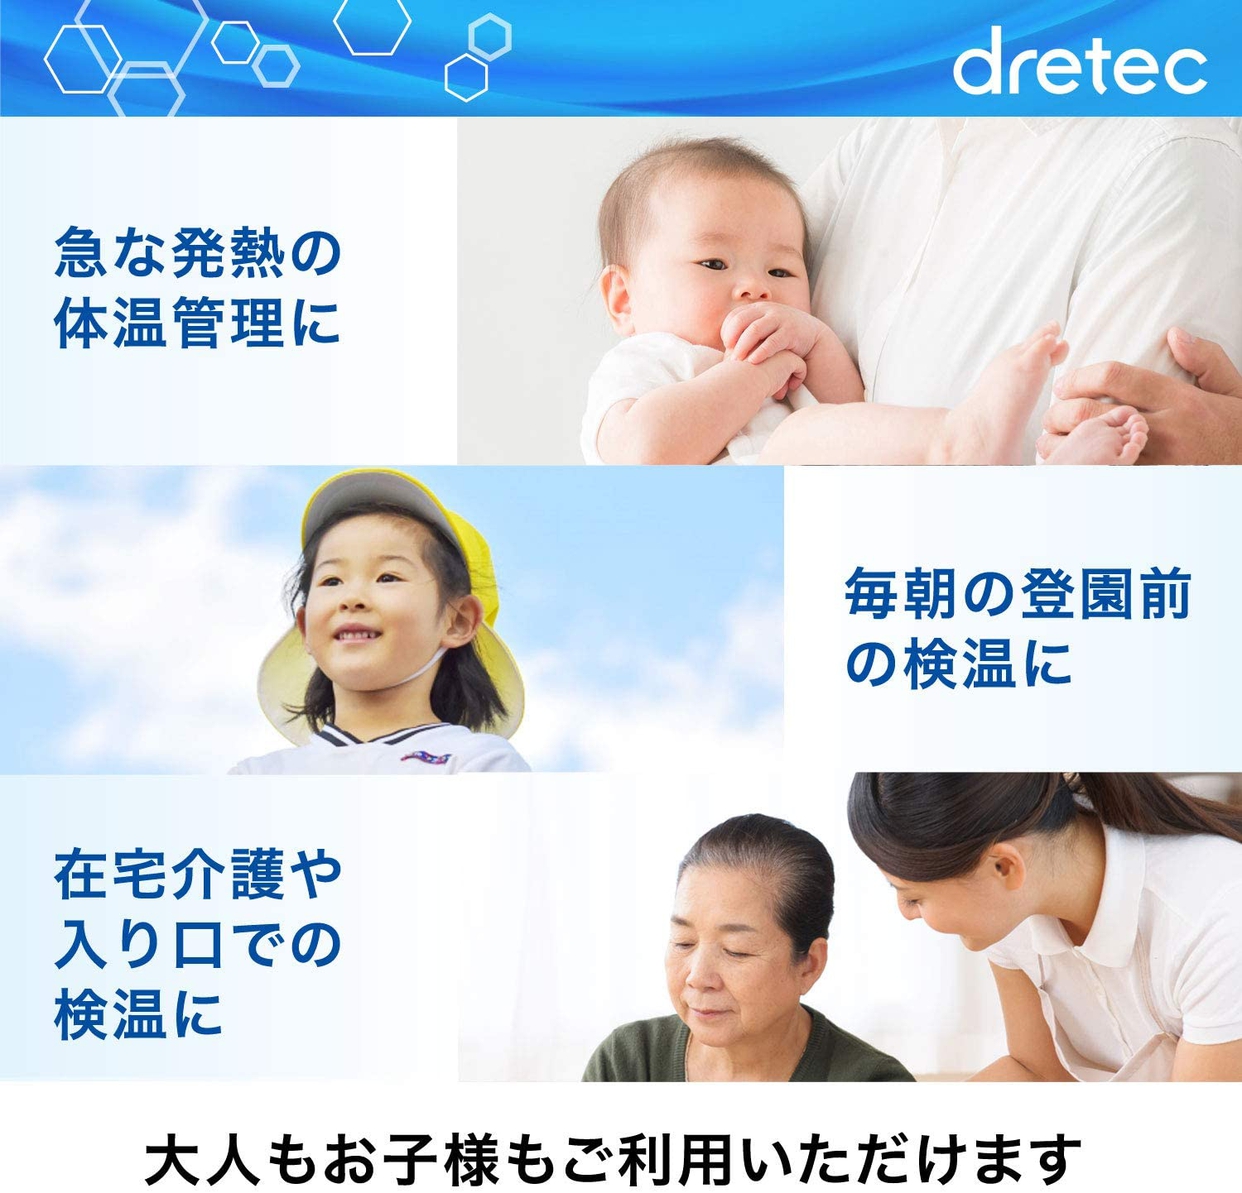 dretec(ドリテック) 非接触スキャン体温計 TO-402の商品画像サムネ8 